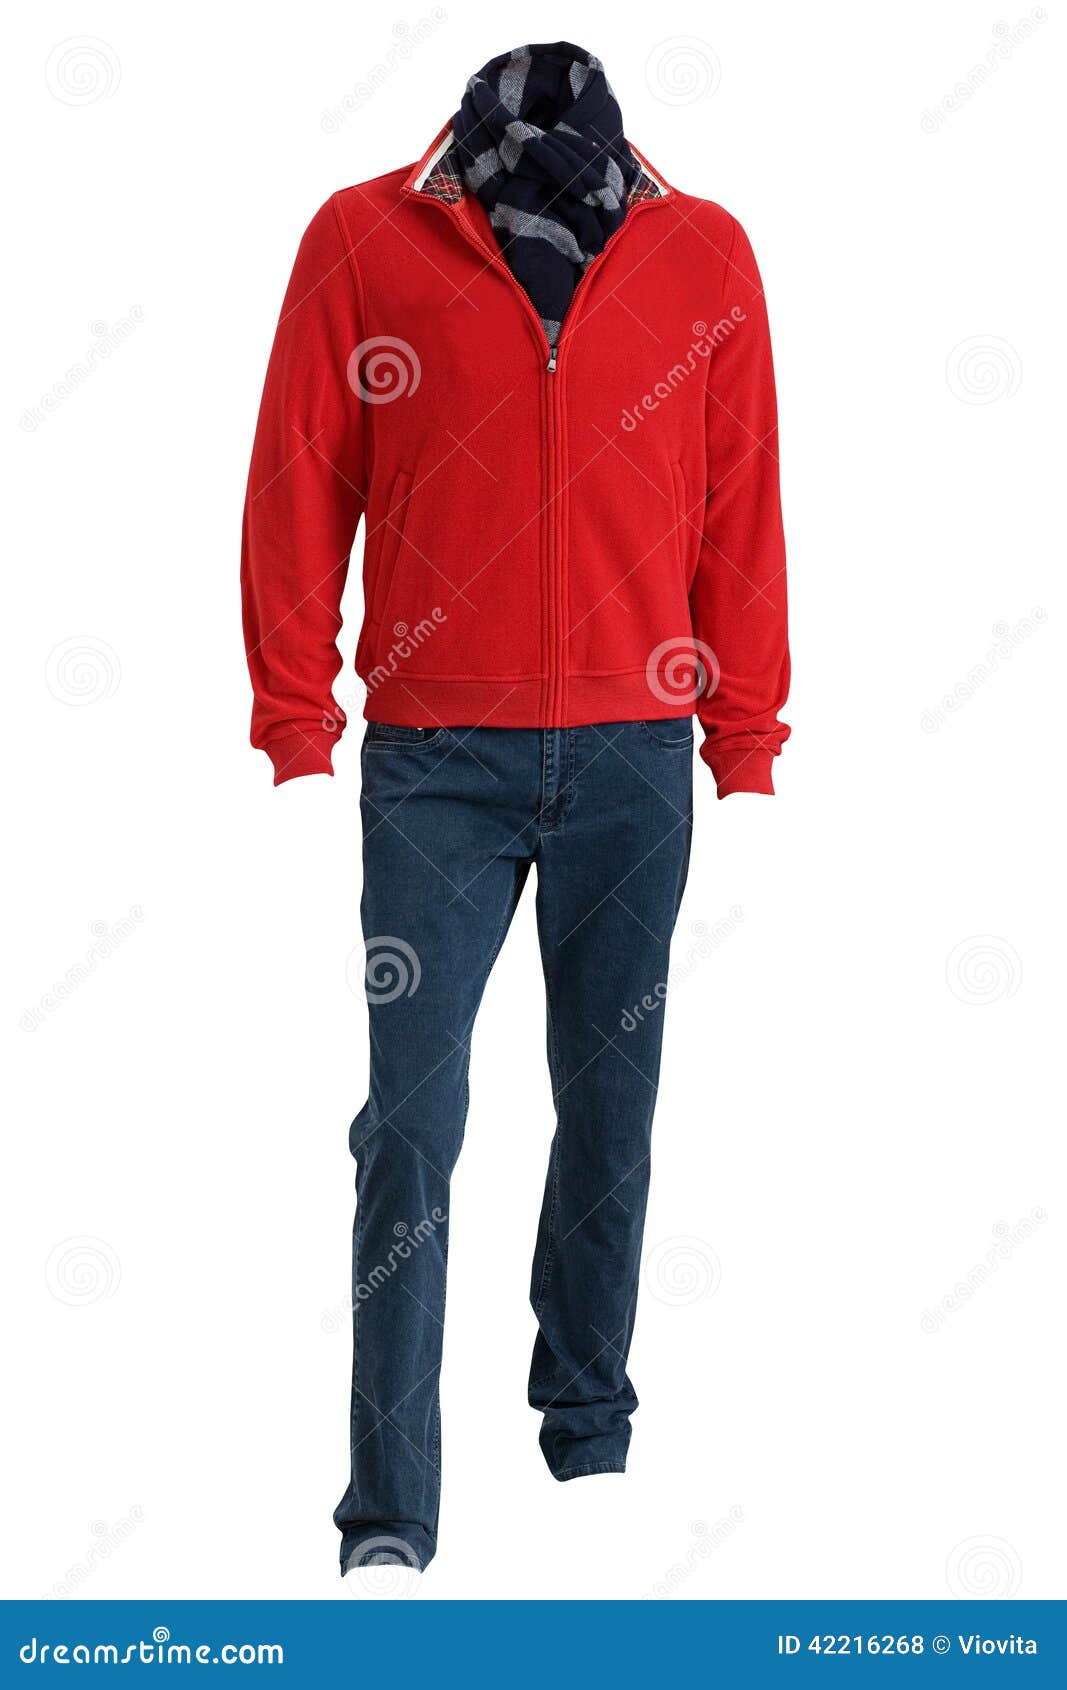 Men sweater and jeans stock photo. Image of dress, blank - 42216268